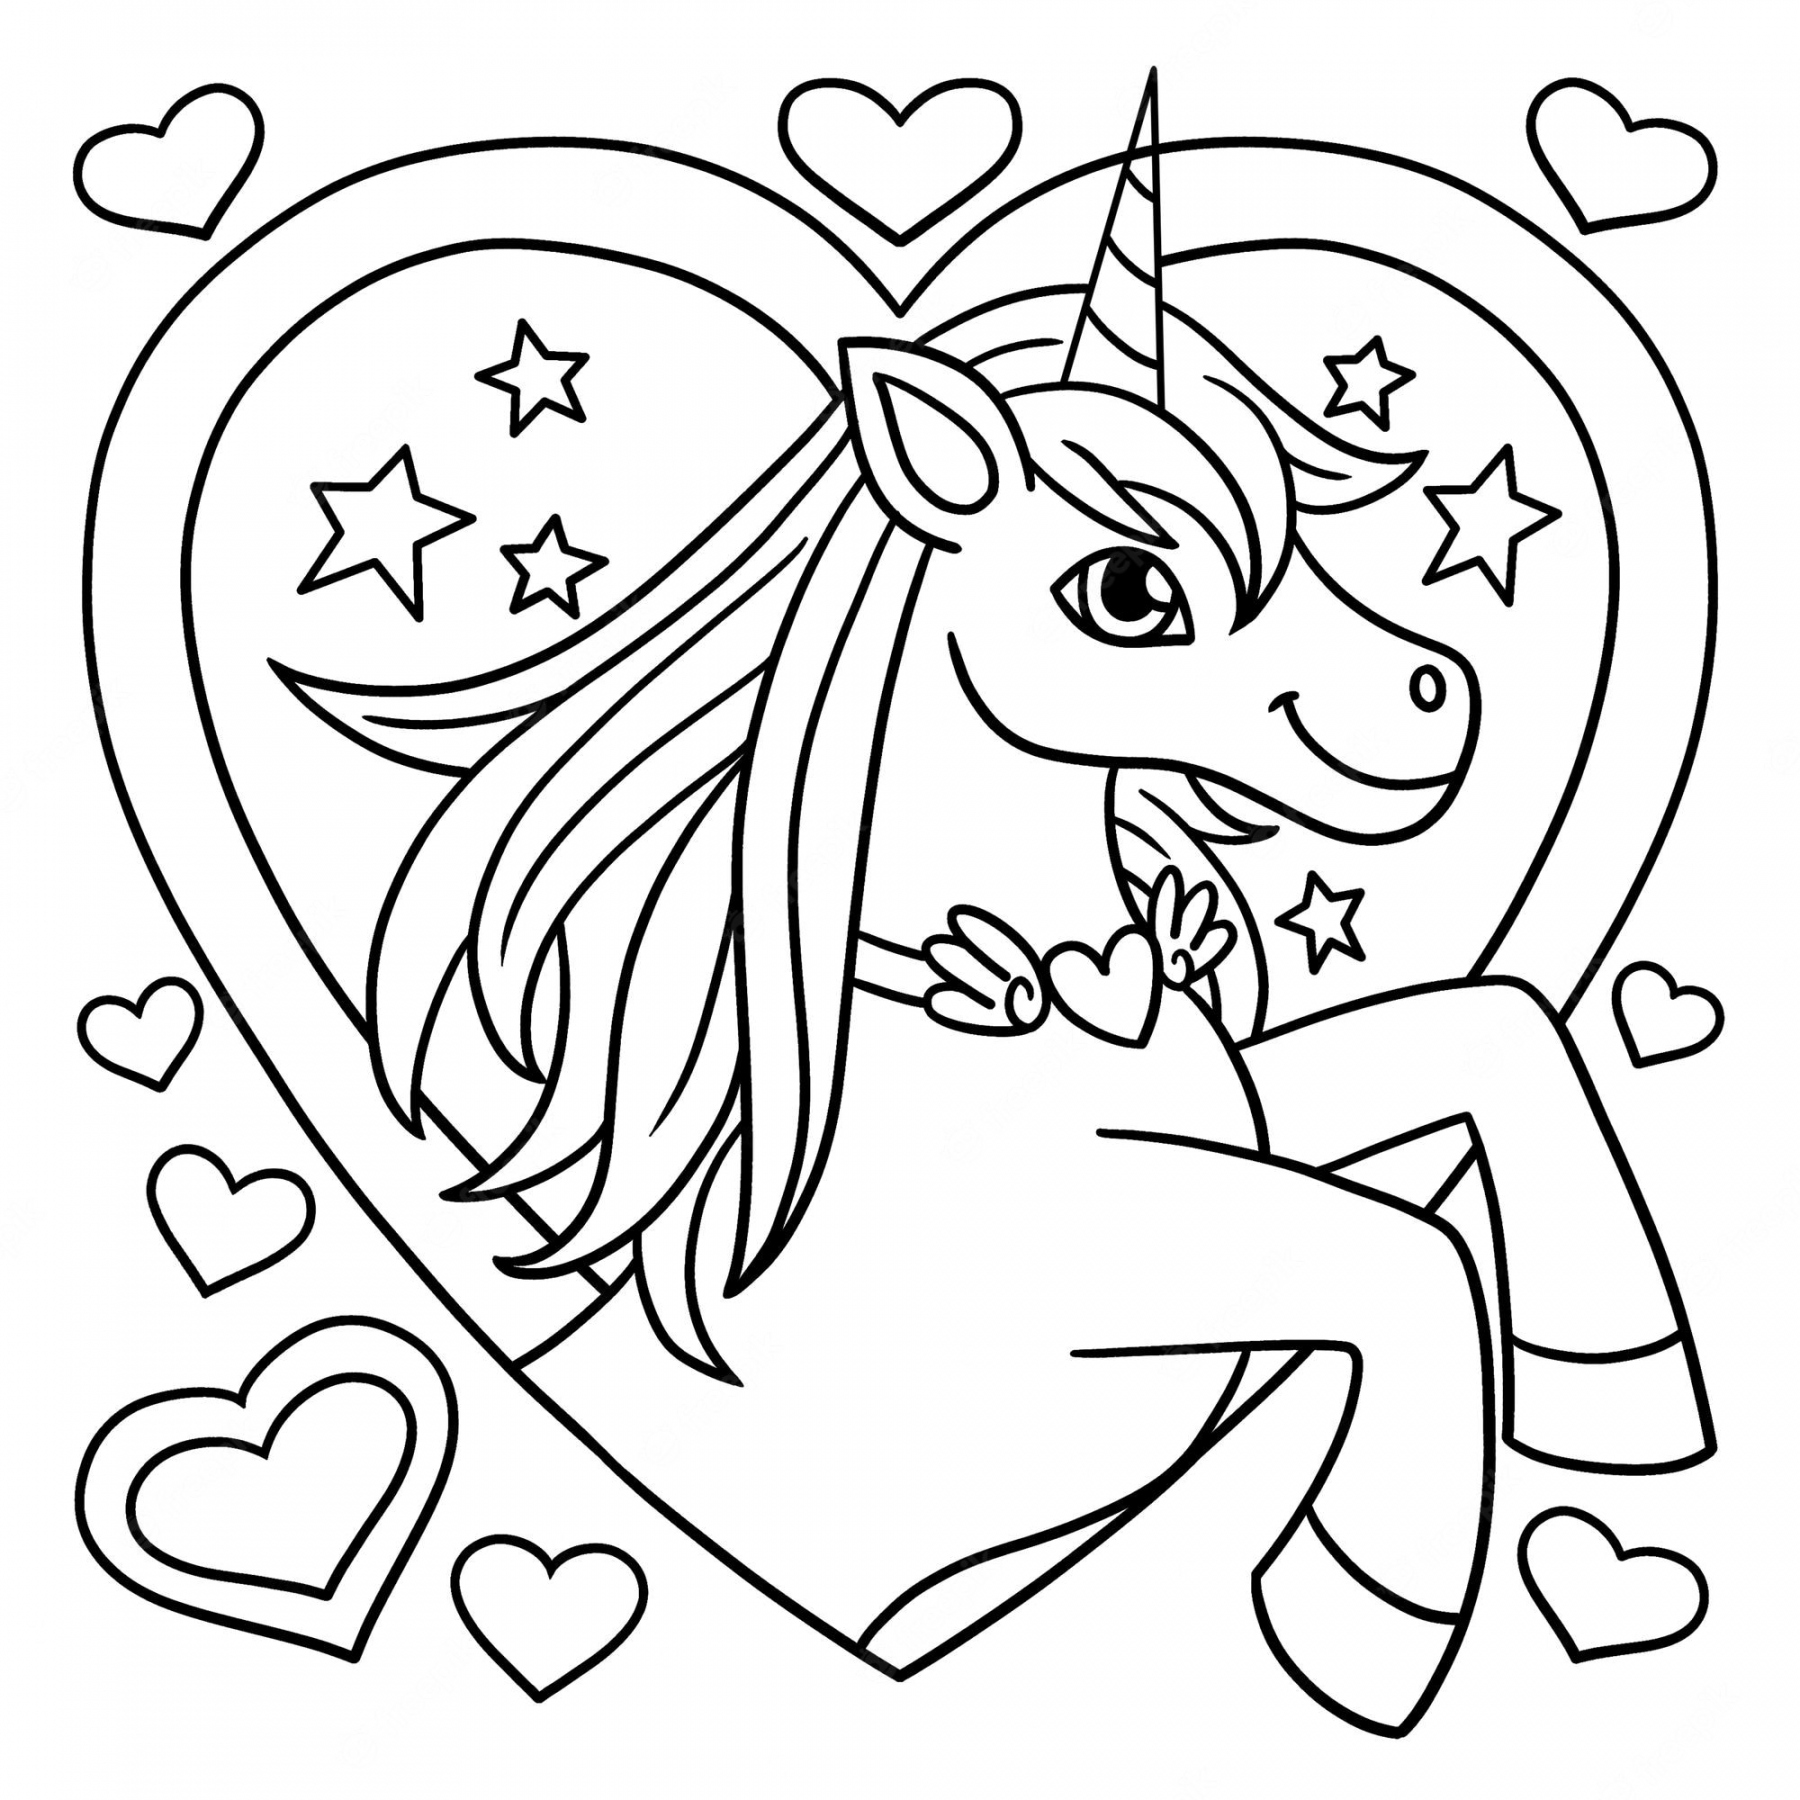 Premium Vector  Unicorn with a heart coloring page for kids - FREE Printables - Unicorn Heart Coloring Pages